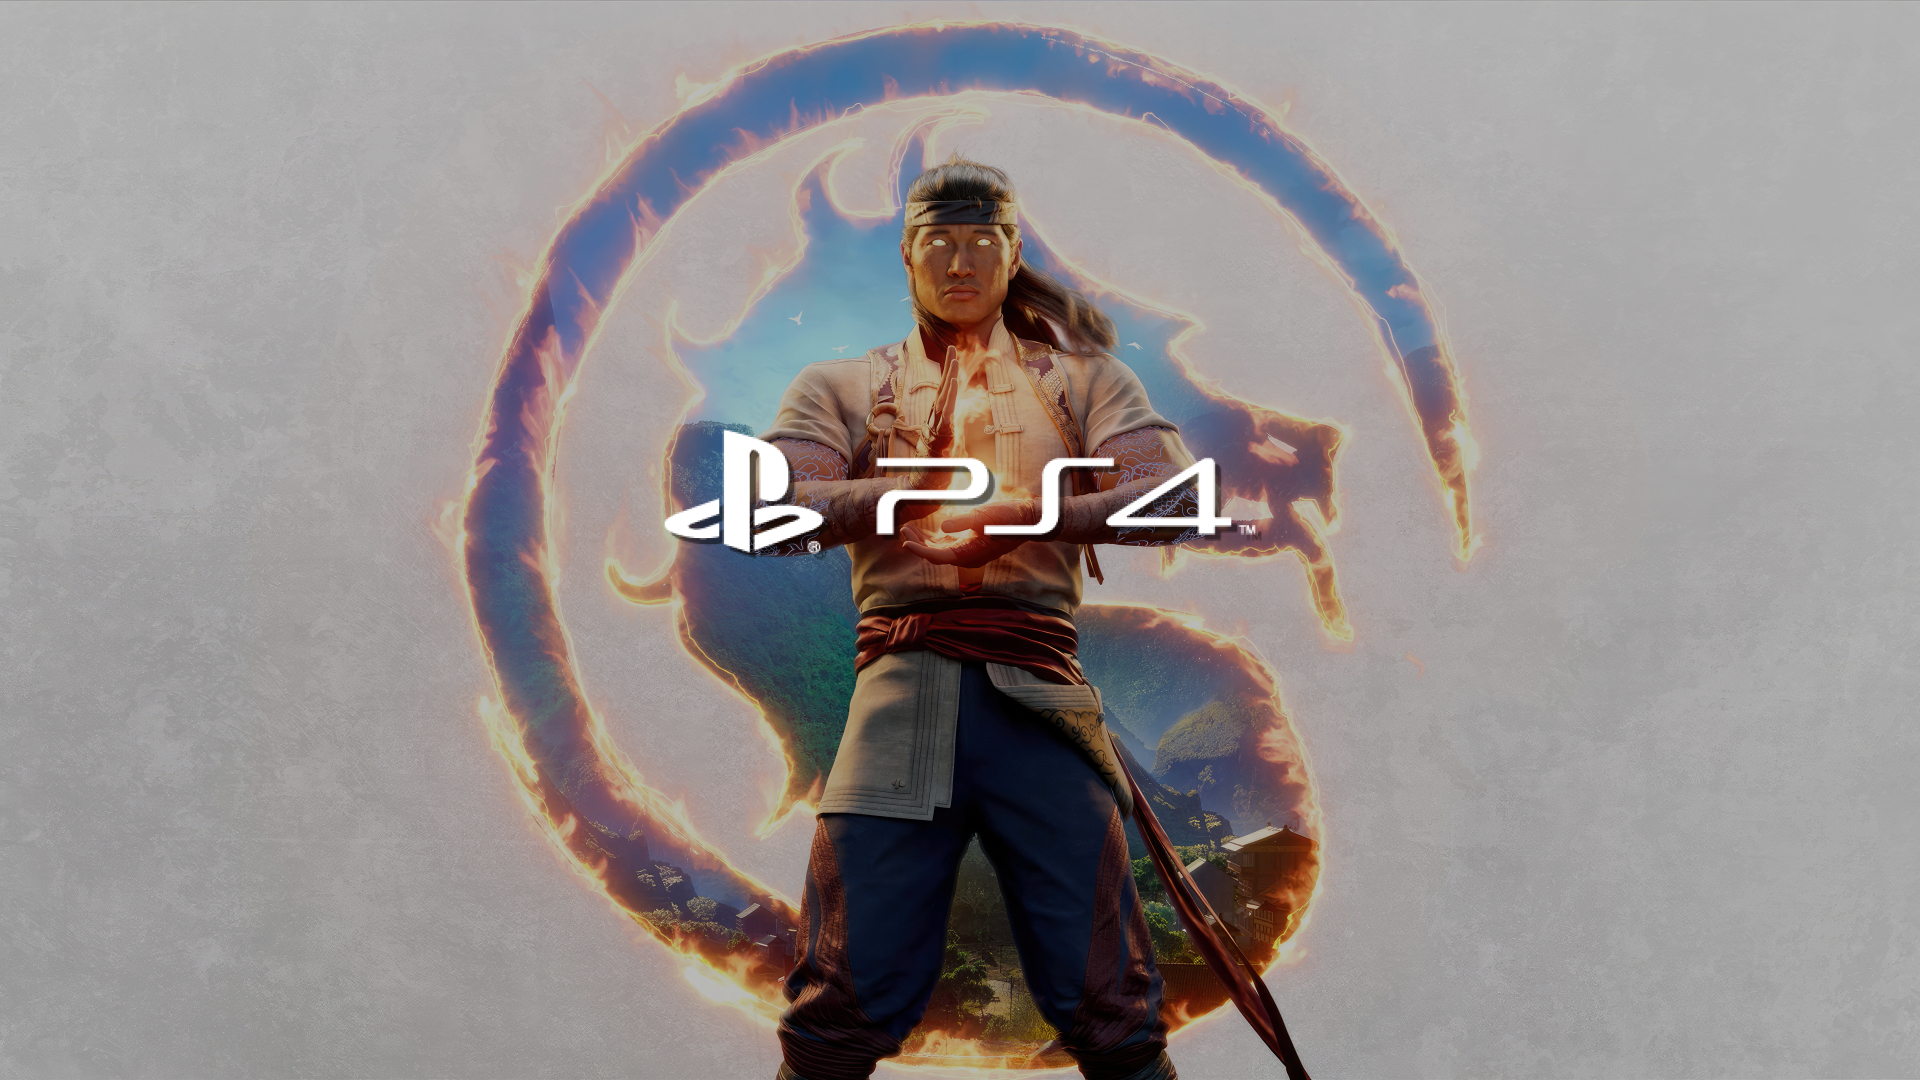 Is Mortal Kombat 1 Coming to PS4?